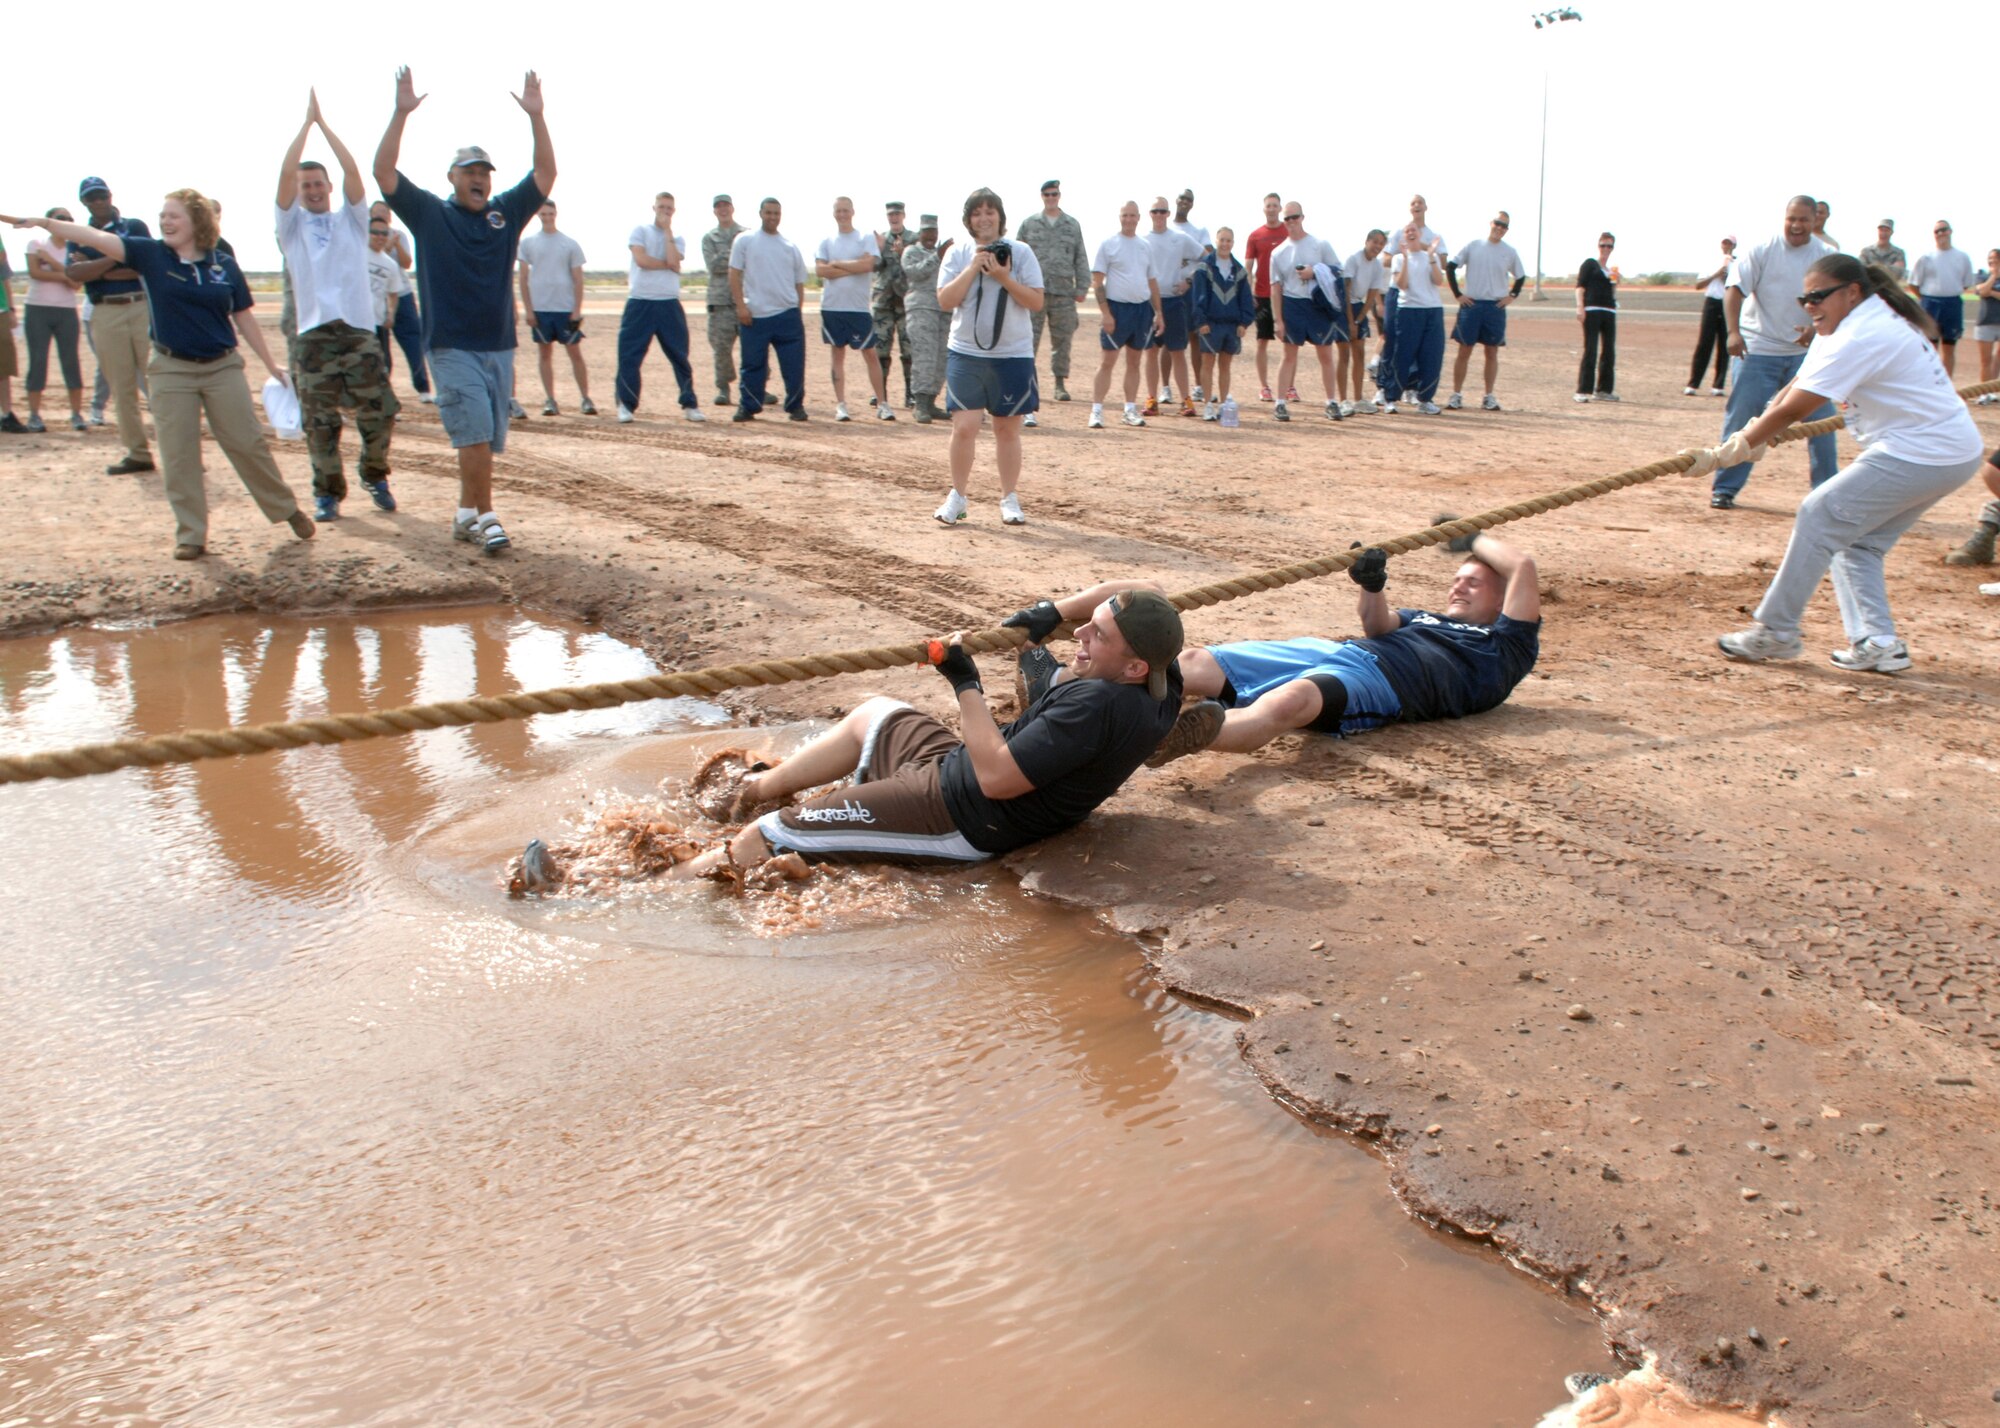 Team members from the 49th Logistic Readiness Squadron dive feet first into the muddy water, after losing in Tug-of-War at Holloman Air Force Base, N.M., October 10. Airmen from different squadrons, tested their strength at the Tug-of-War game during Sports day. (U.S. Air Force photo/Airman 1st Class Veronica Salgado)